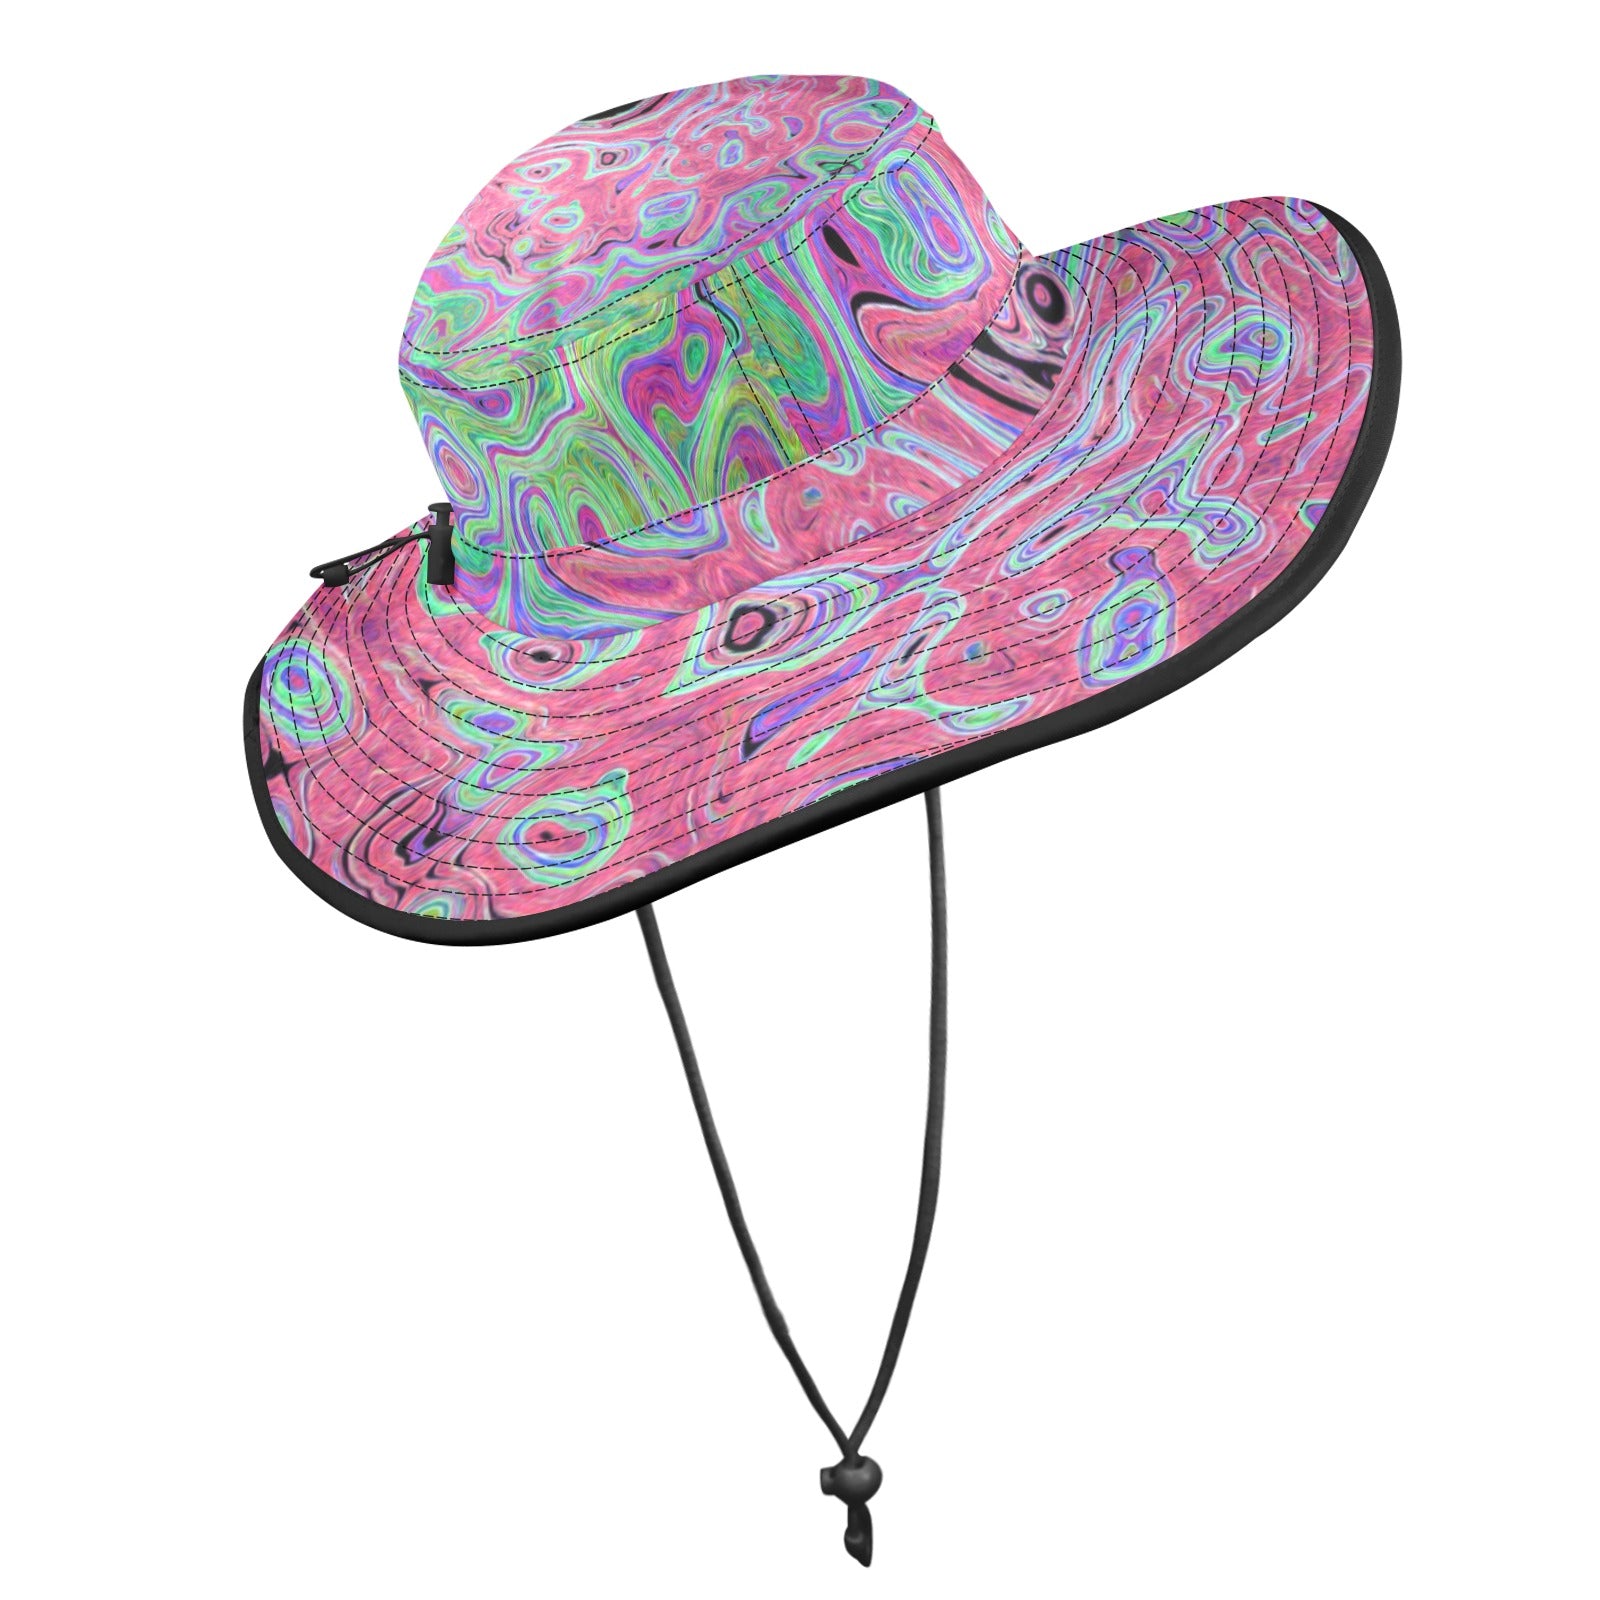 Wide Brim Sun Hat - Pink and Lime Green Groovy Abstract Retro Swirl